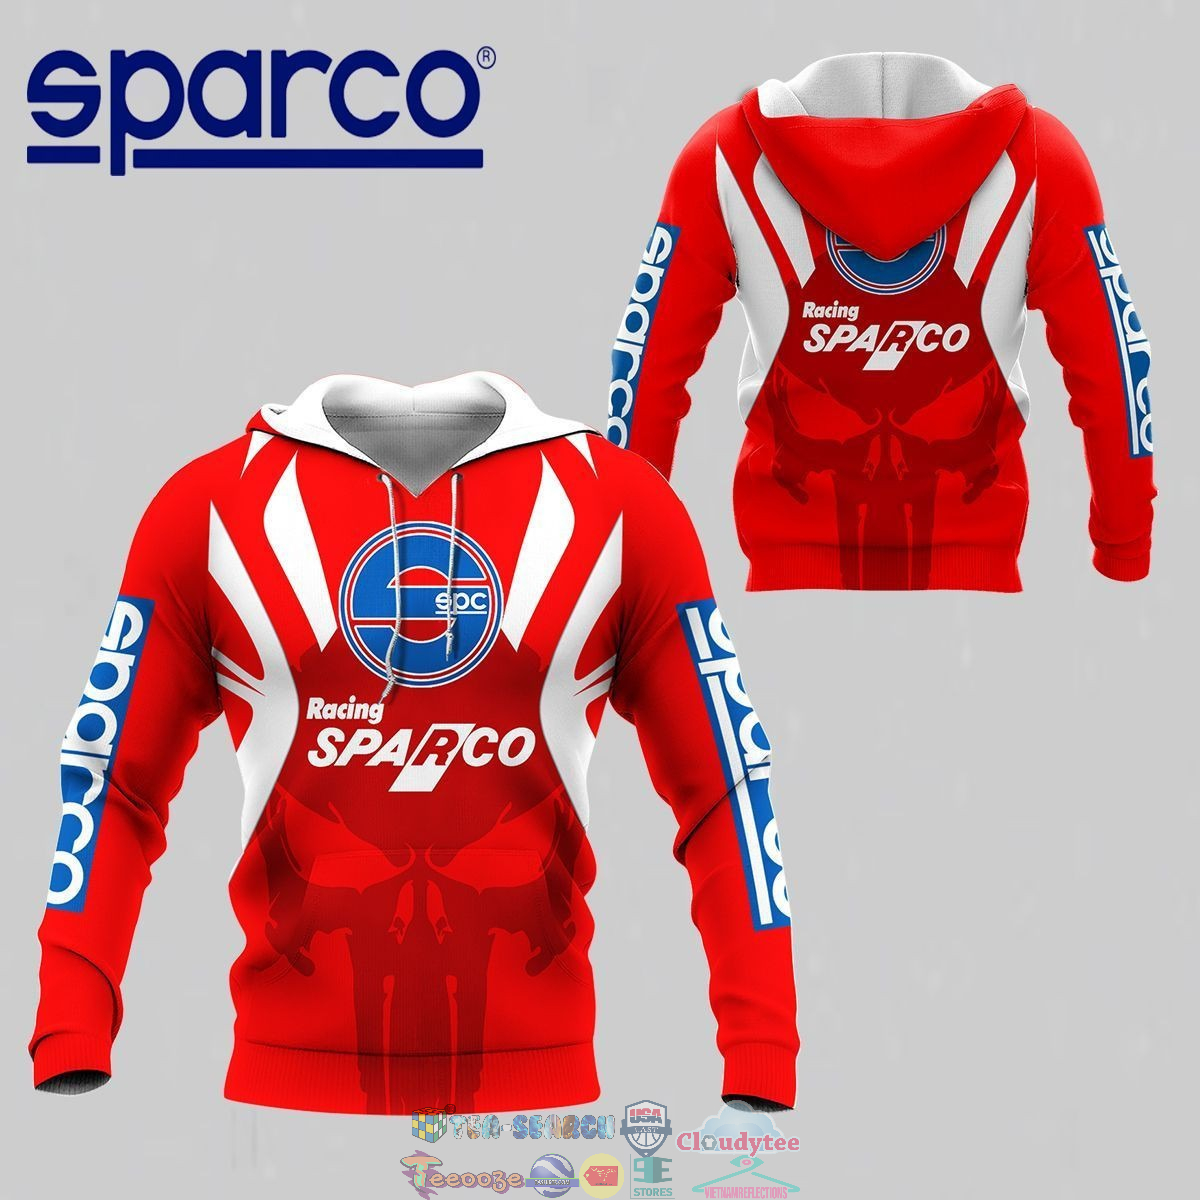 Sparco ver 29 3D hoodie and t-shirt